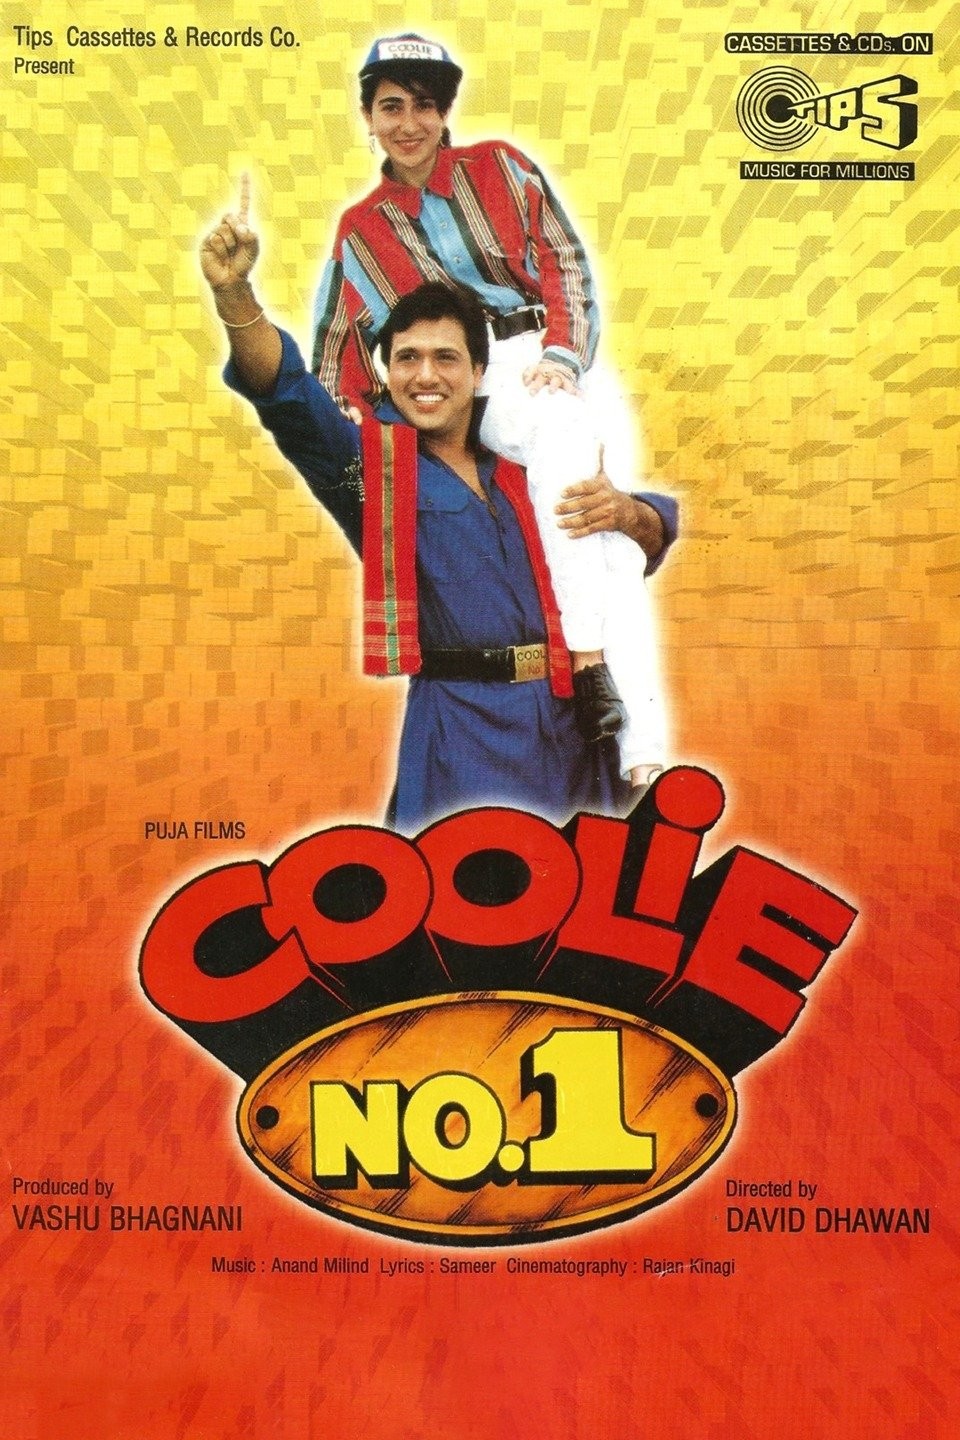 Ali coolie mirza songs download